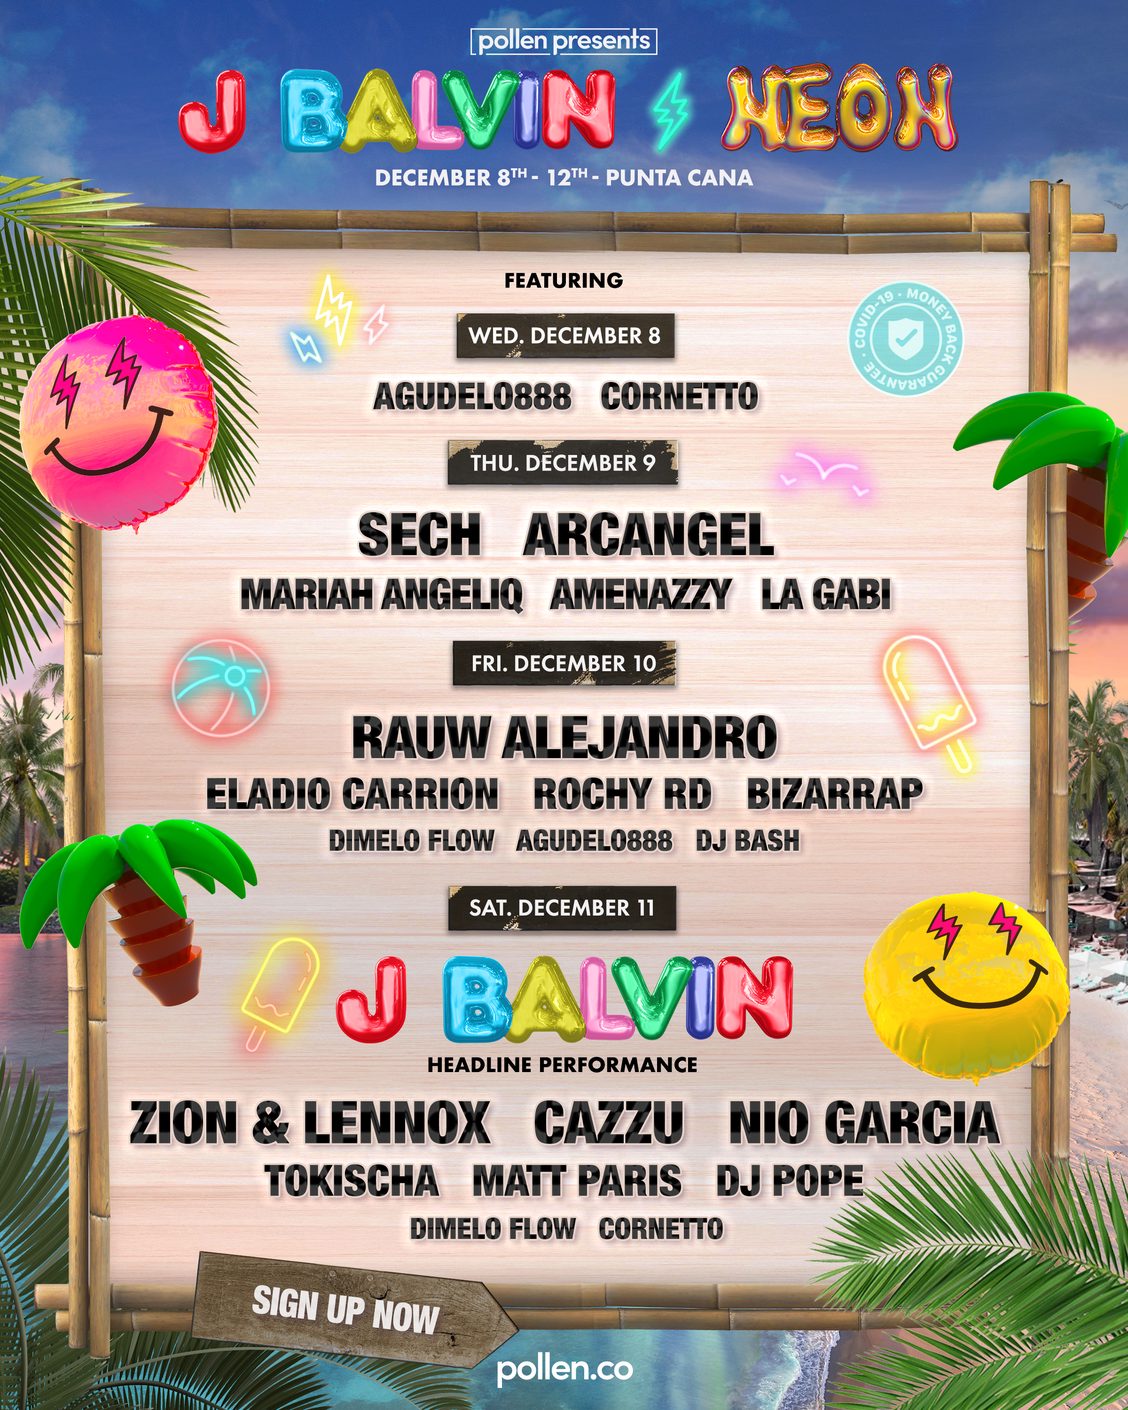 J Balvin Announces NEON Experience in Punta Cana with Rauw